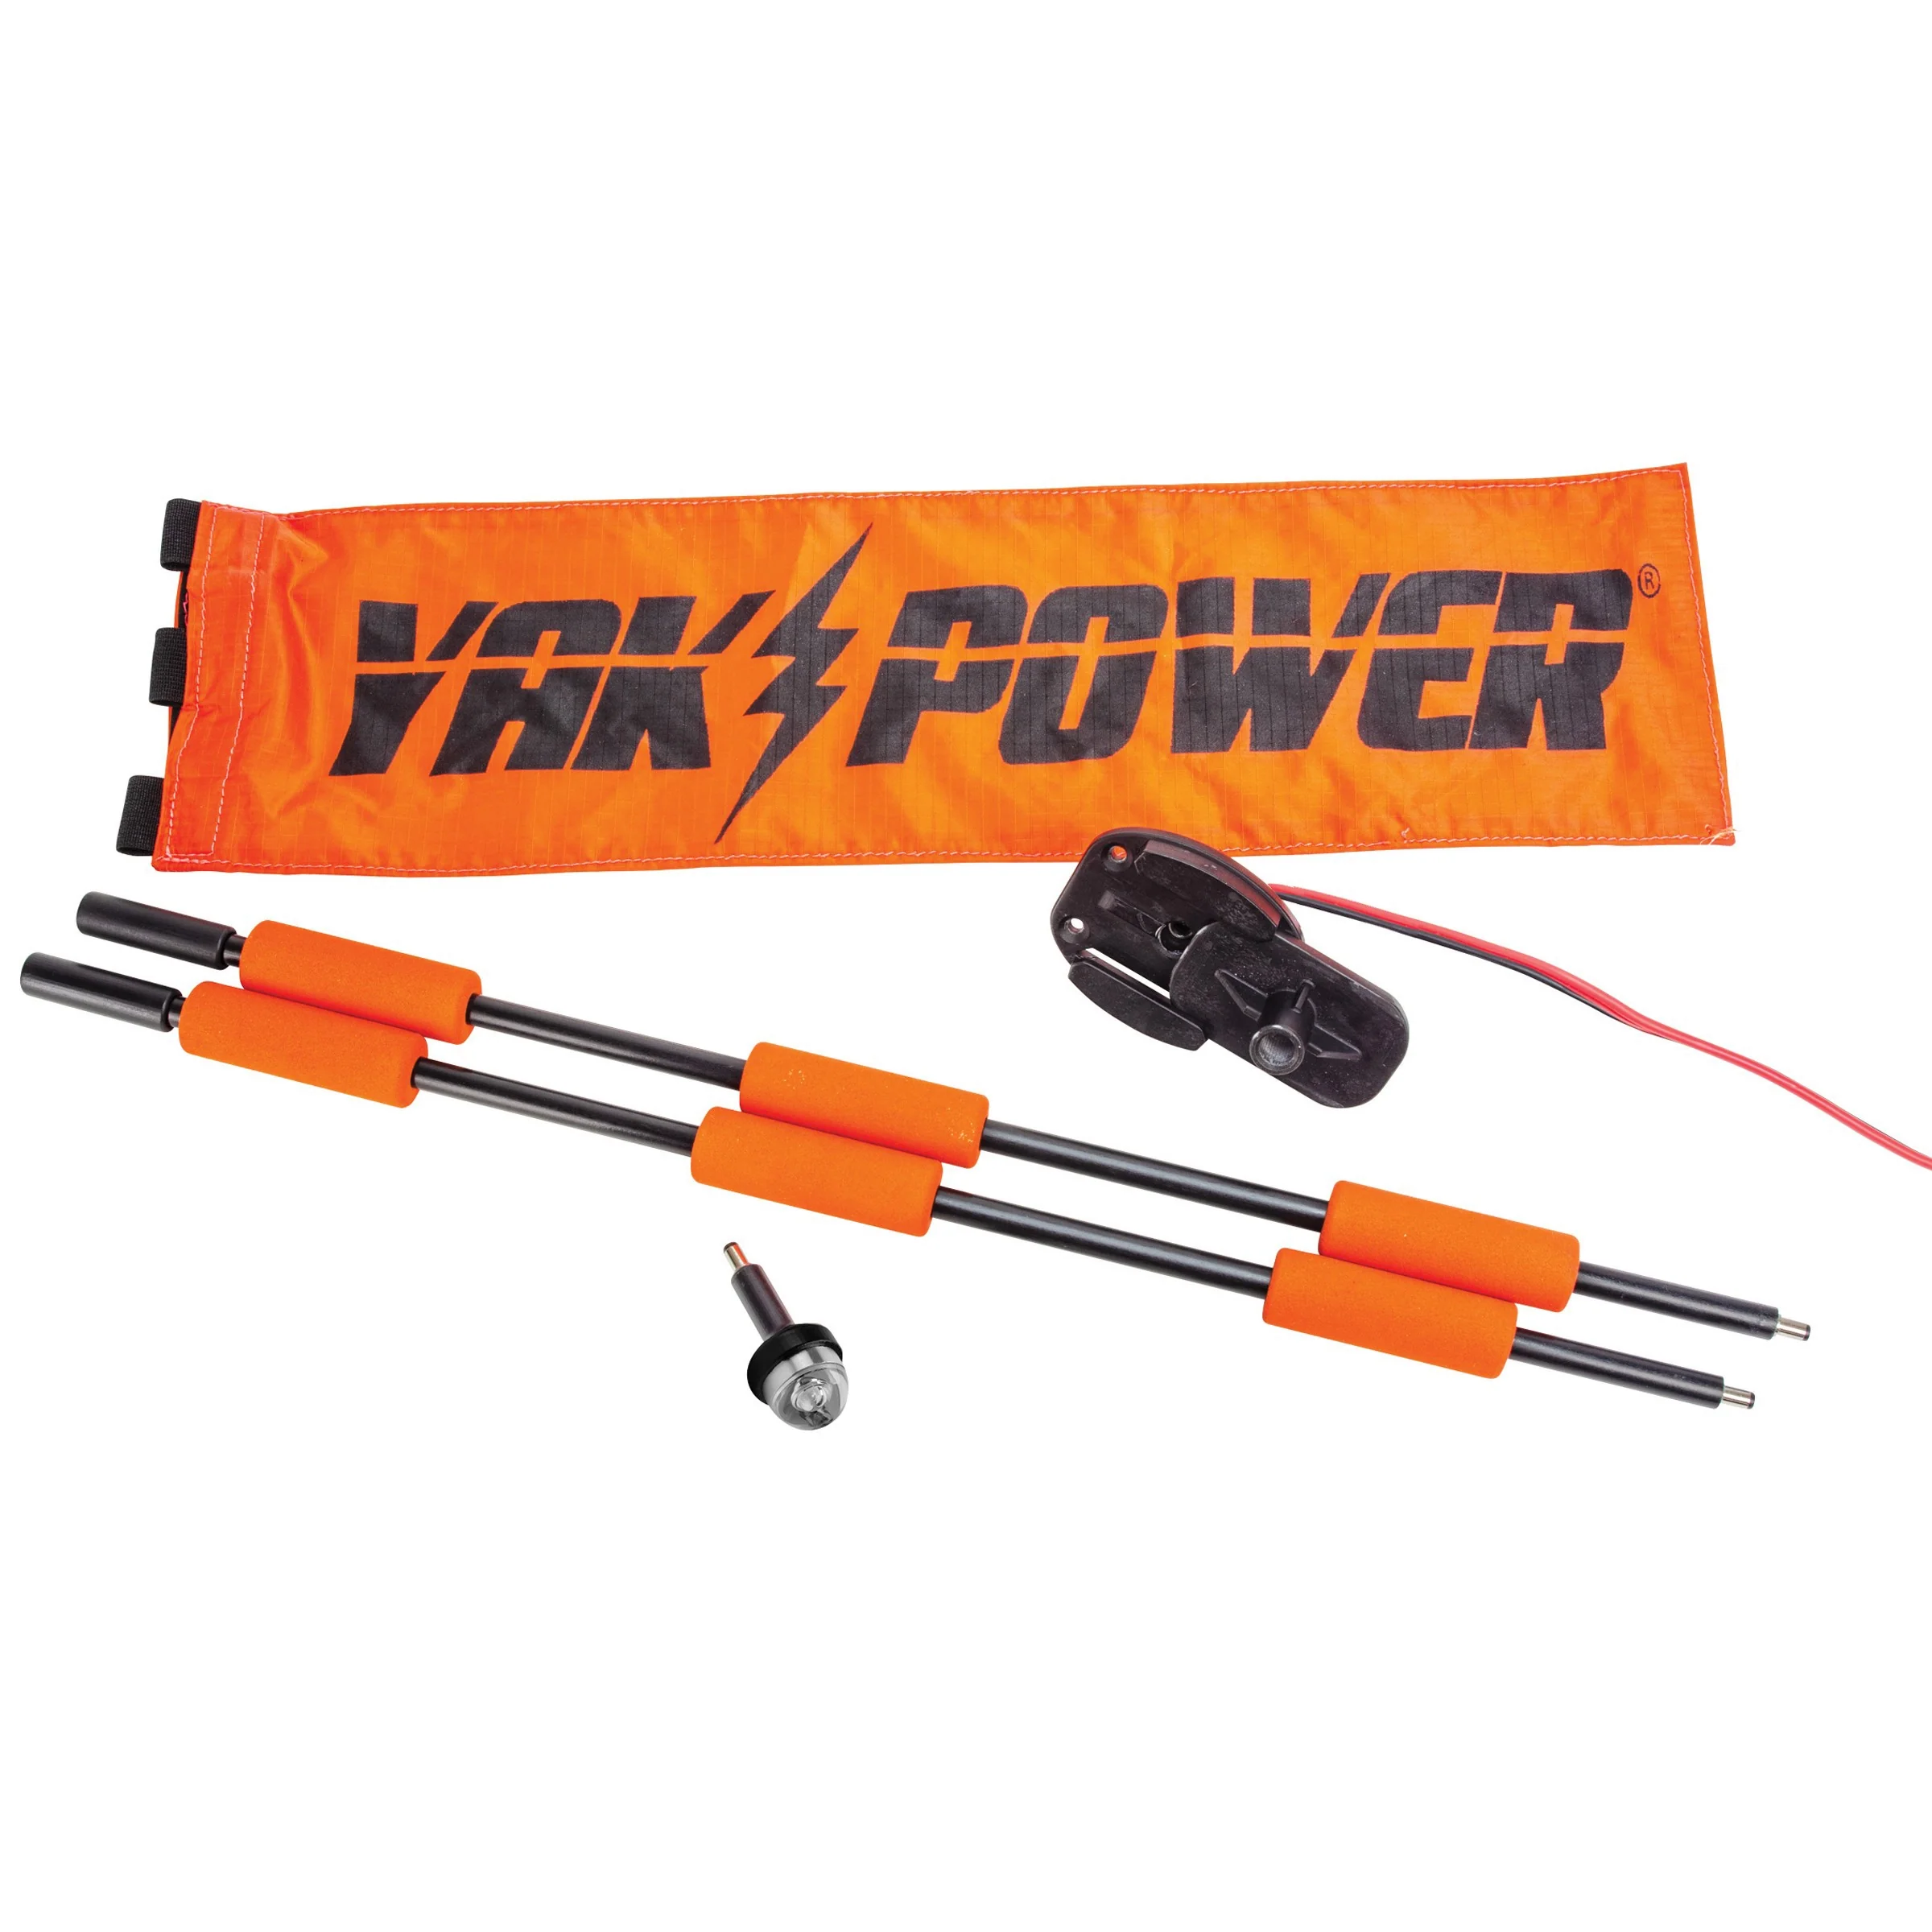 YP-LR360 Lightning Rod - Extendable Powered 360 Degree Safety Light and Safety Flag Questions & Answers